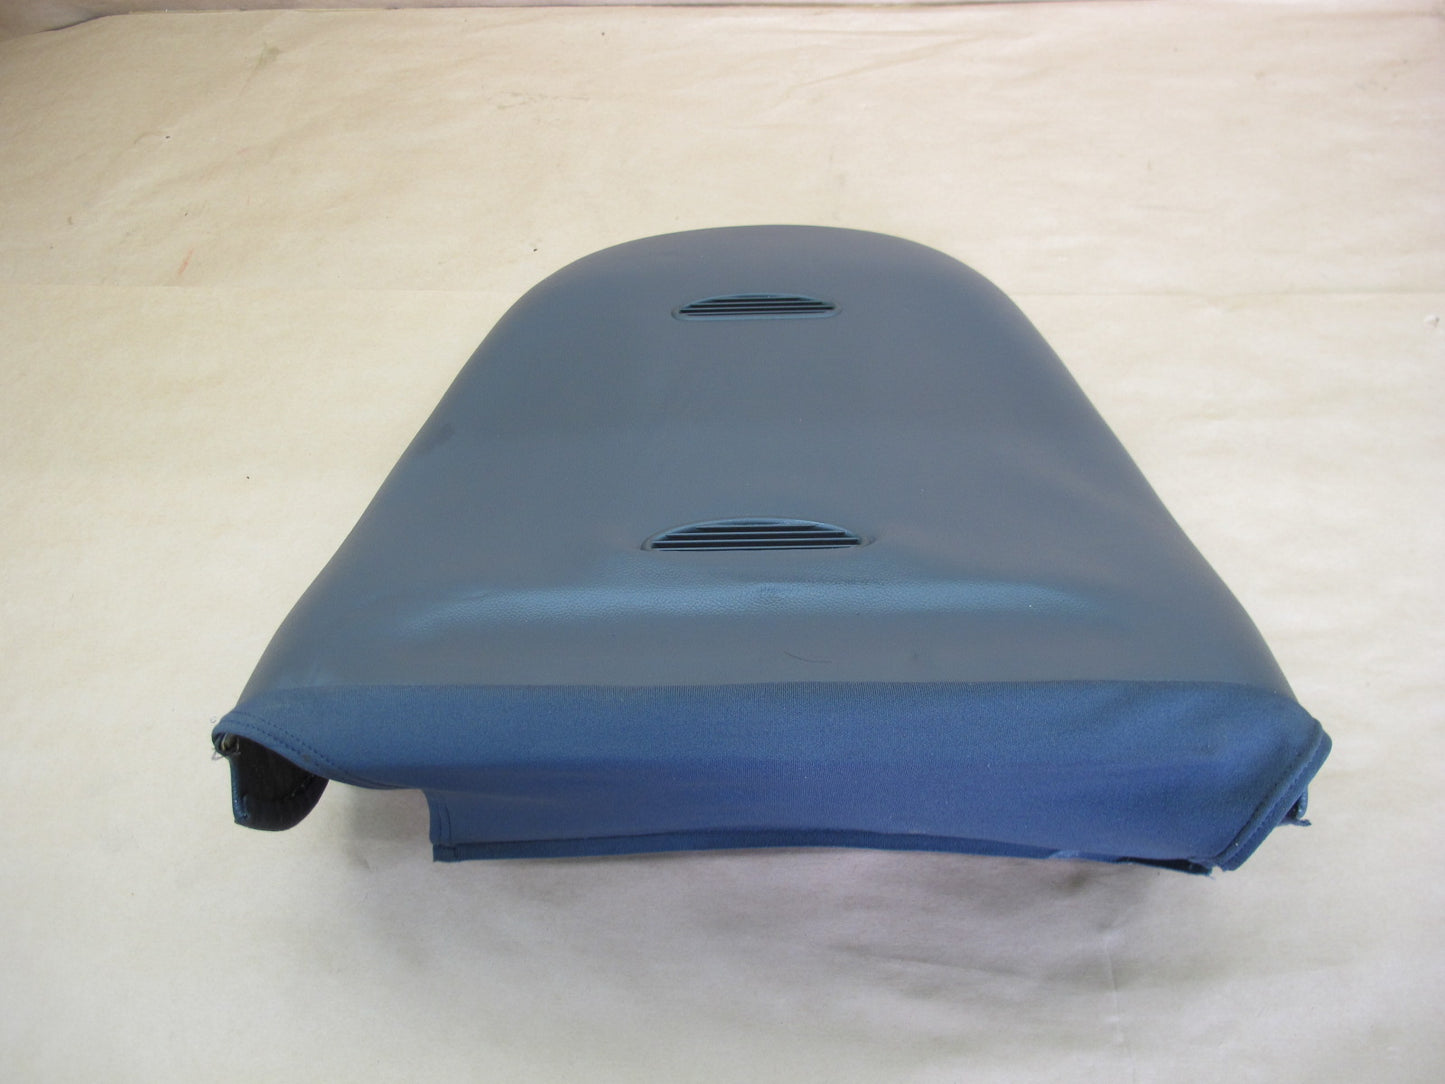 03-09 MERCEDES R230 FRONT RIGHT SEAT LEATHER UPPER BACKREST CUSHION W TRIM OEM